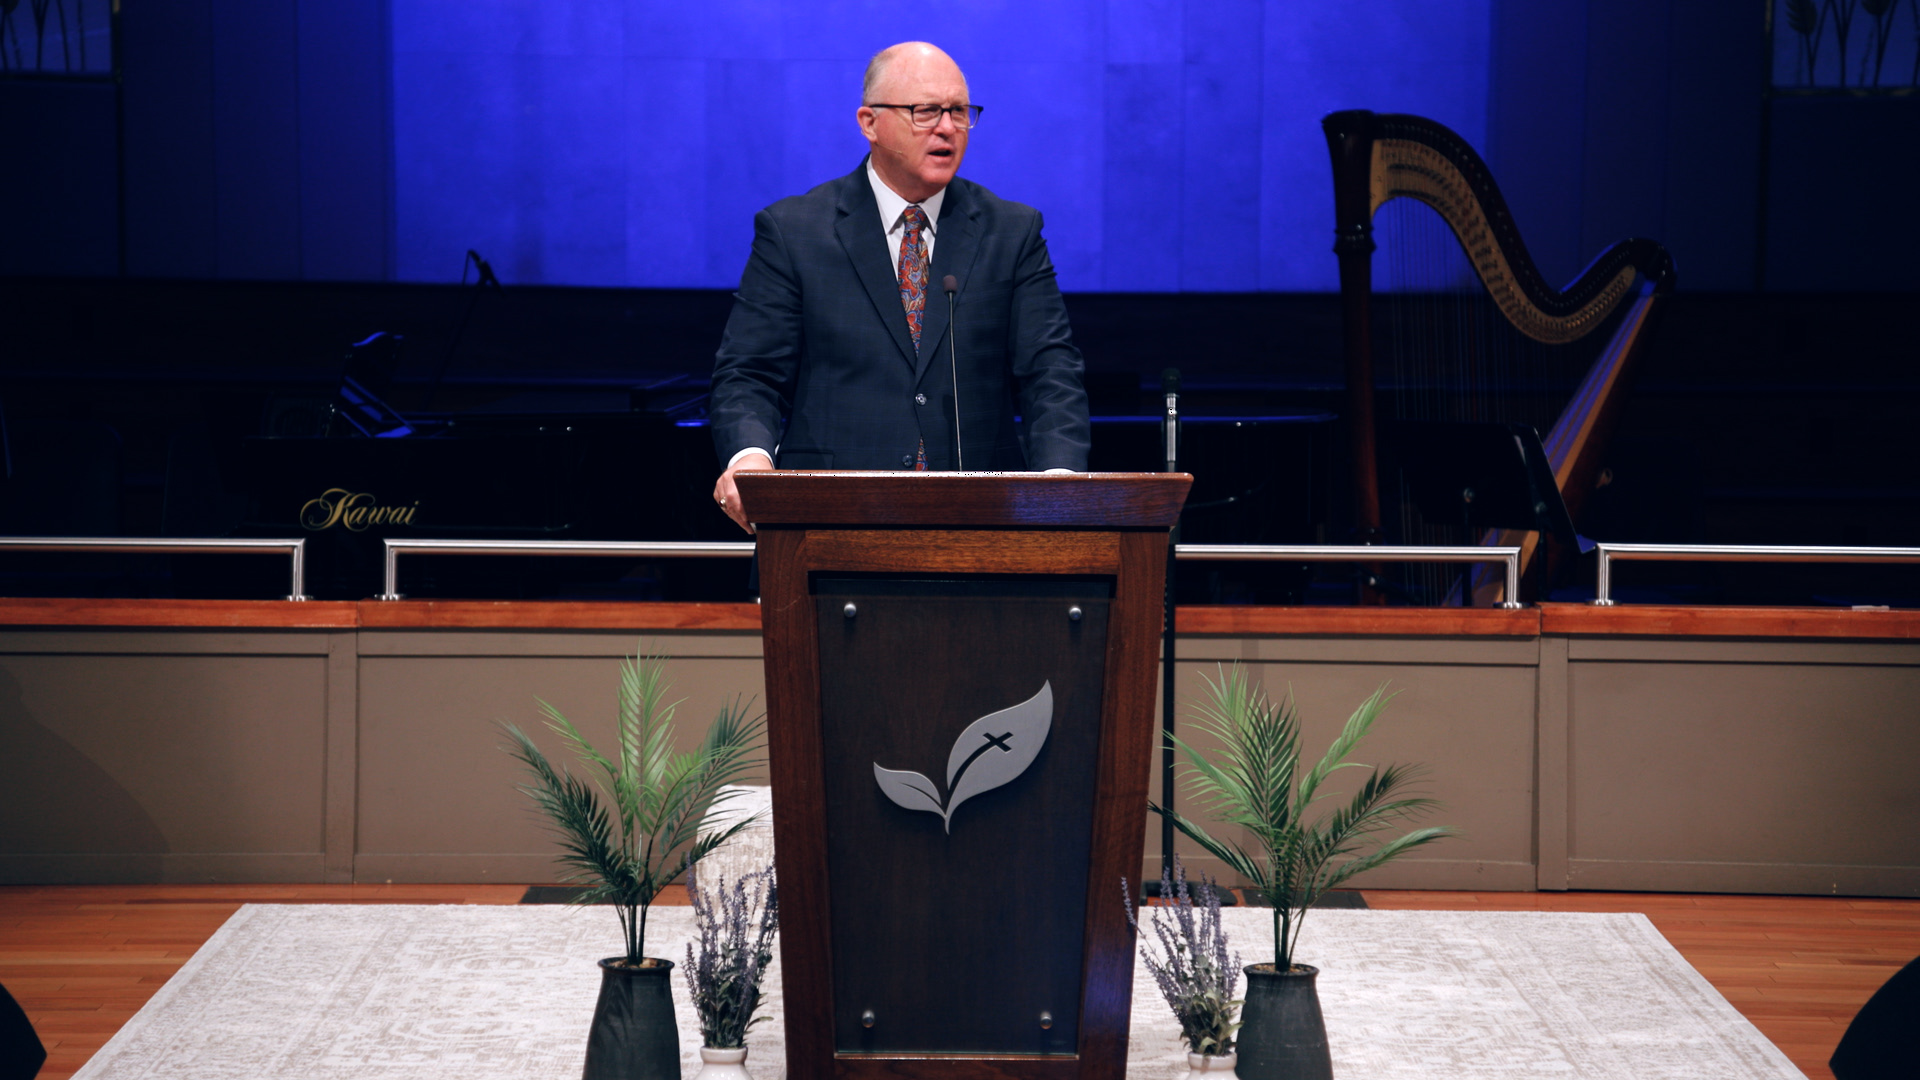 Pastor Paul Chappell: The Source of Christian Courage